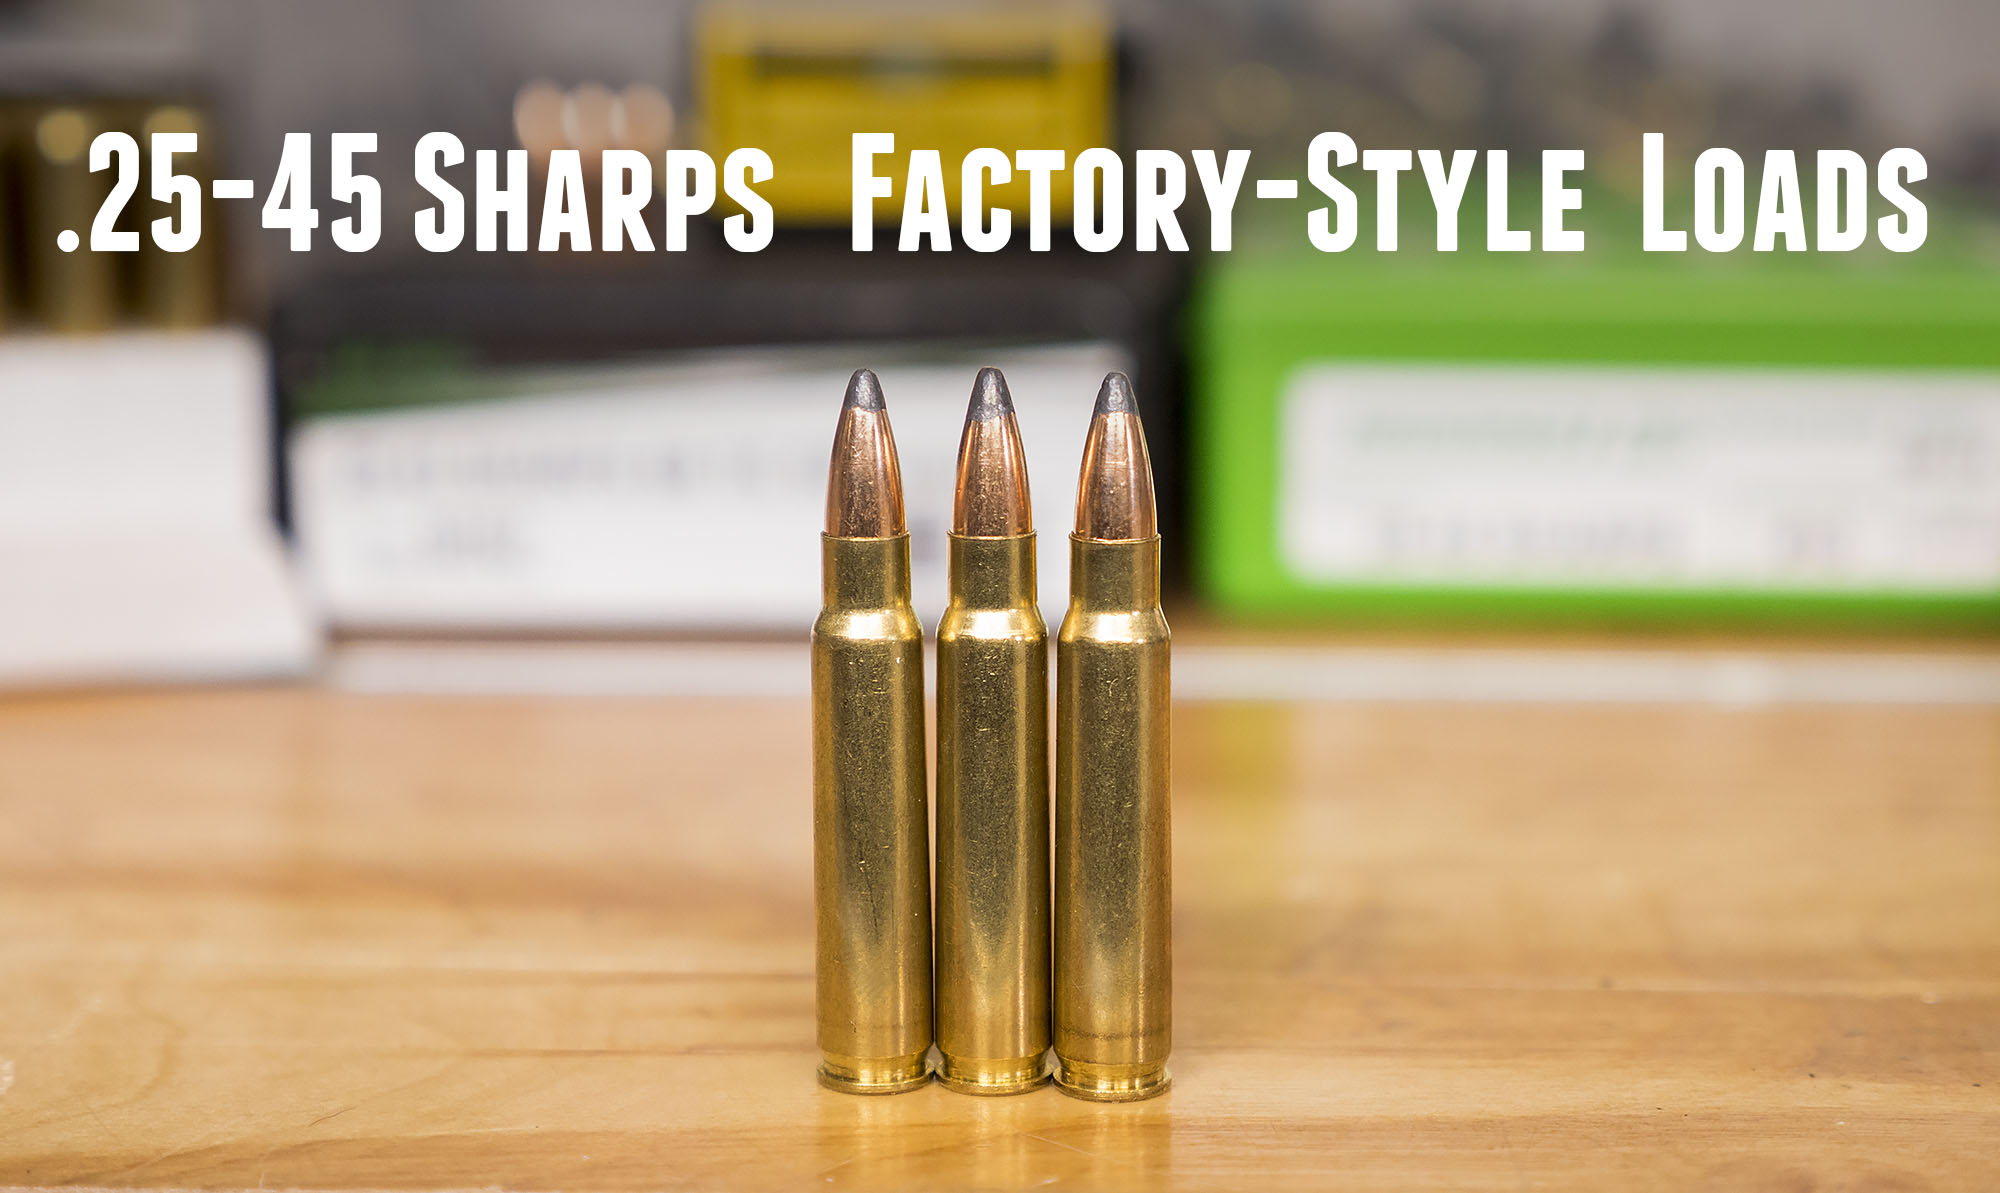 View all posts in .25-45 Sharps. 